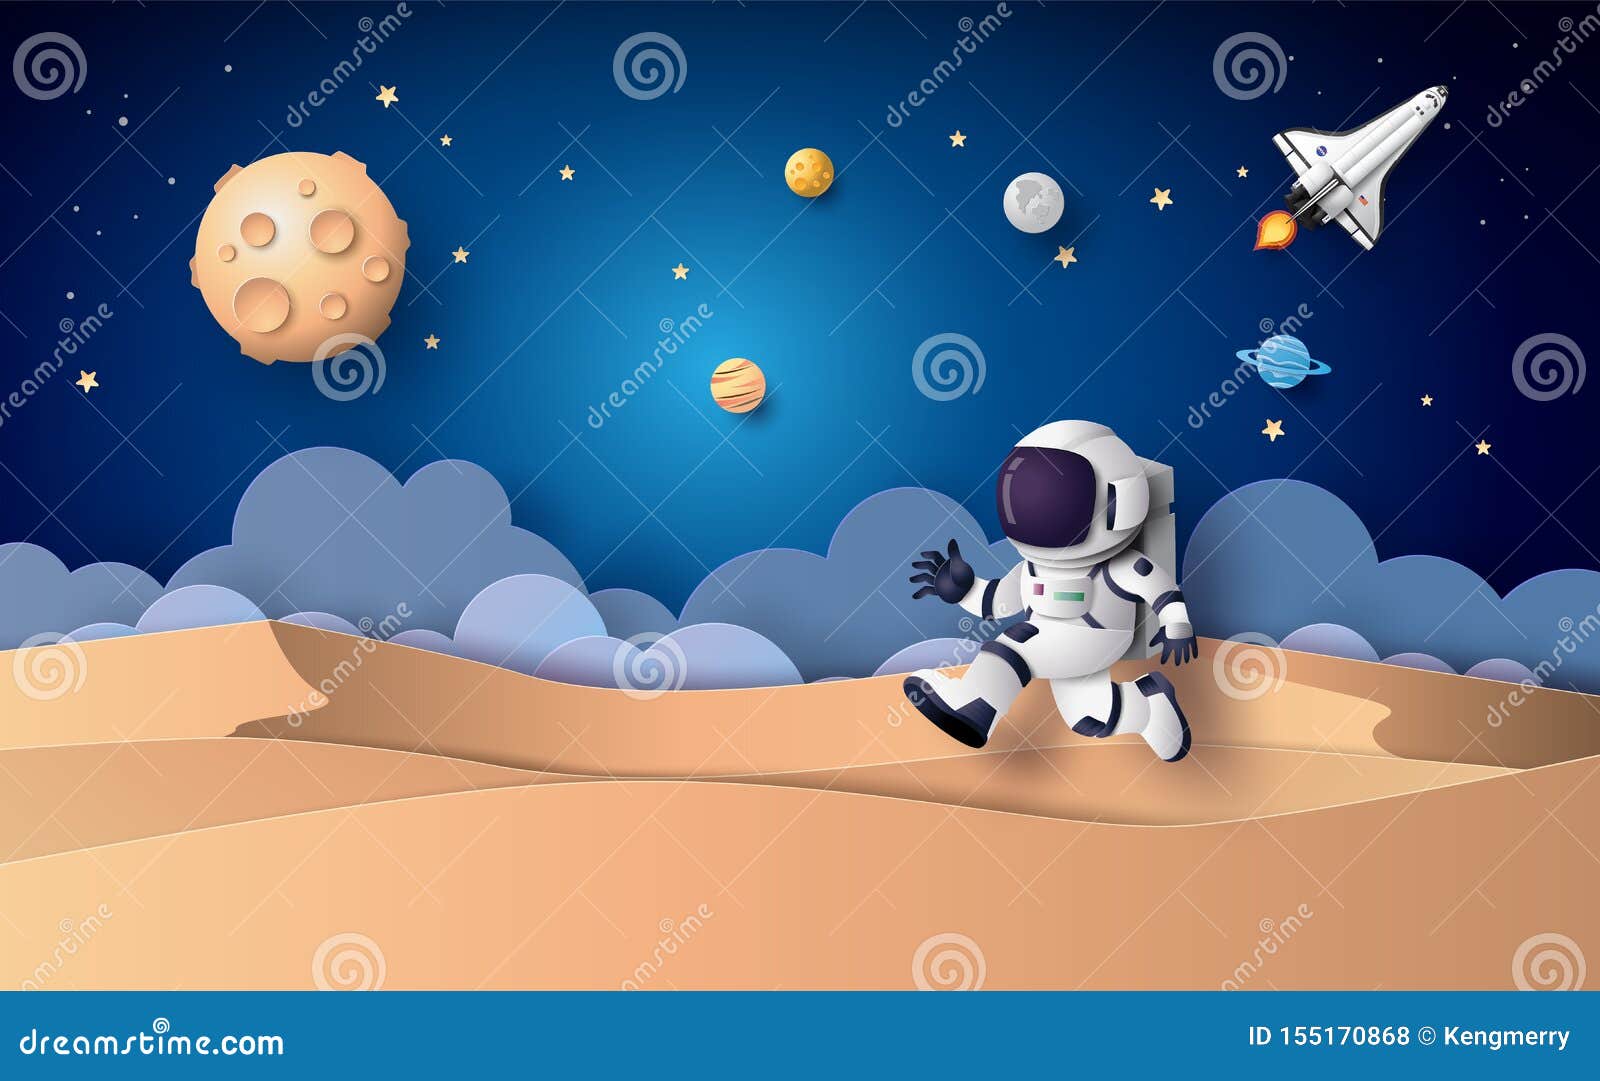 astronaut floating in the stratosphere